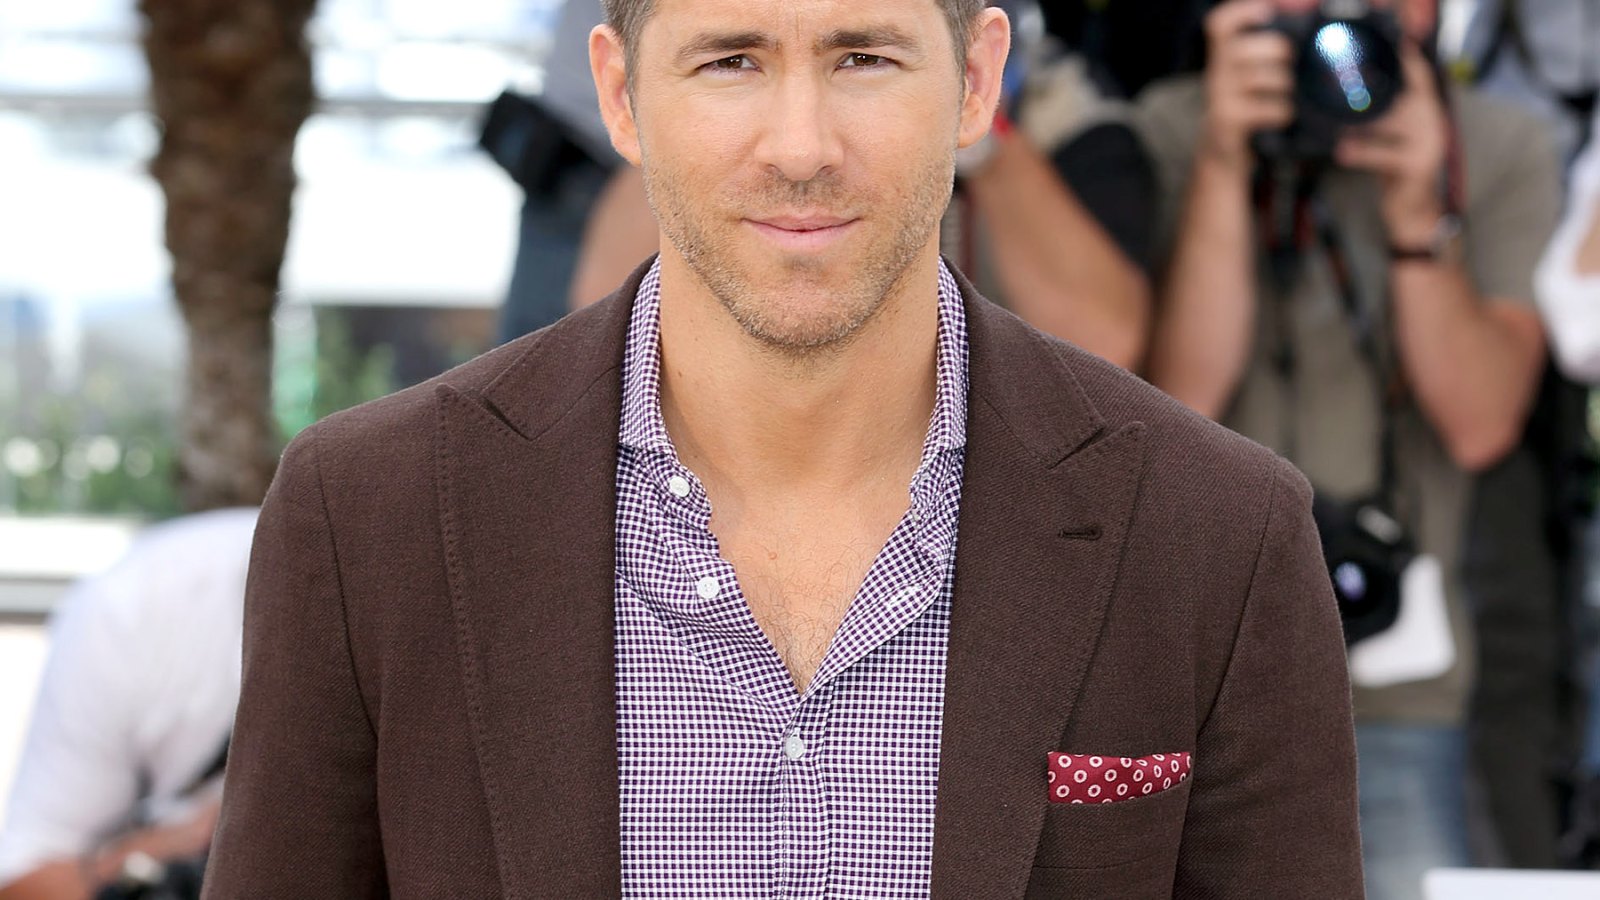 Ryan Reynolds at "The Captive" photocall at Cannes Film Festival